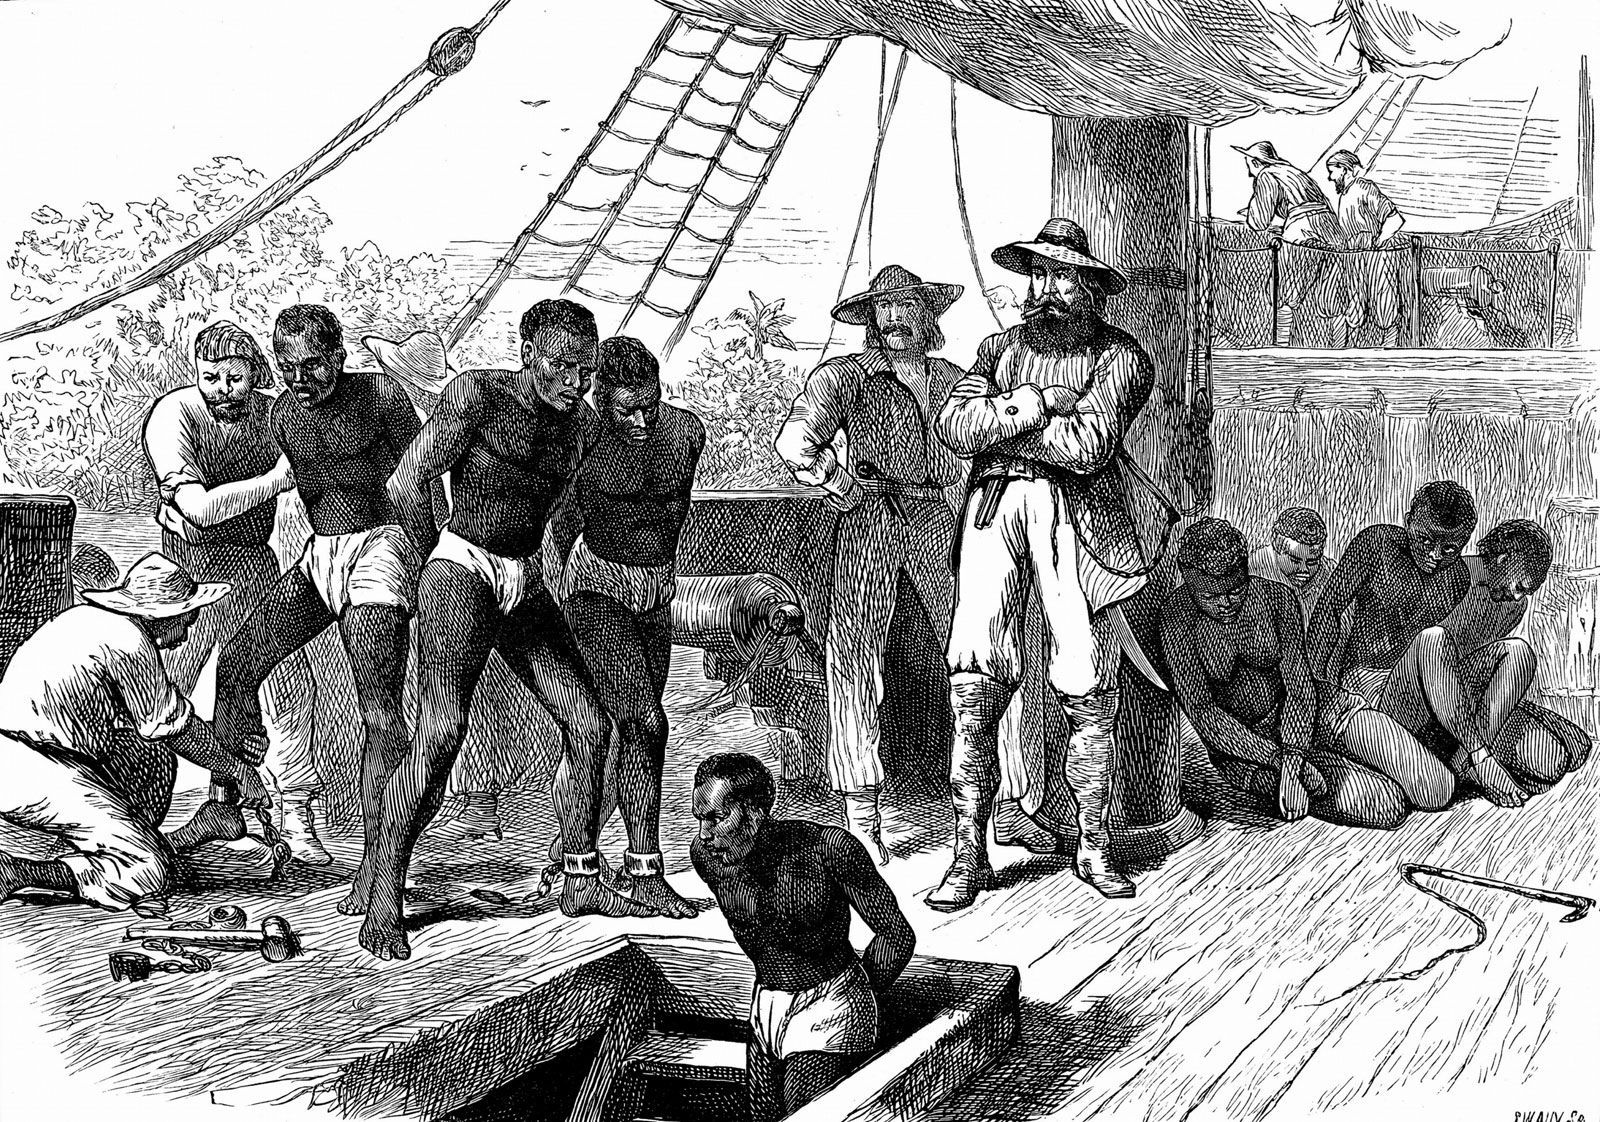 The African Slave Trade: Tracing its Impact from the 15th to the 19th Centuries